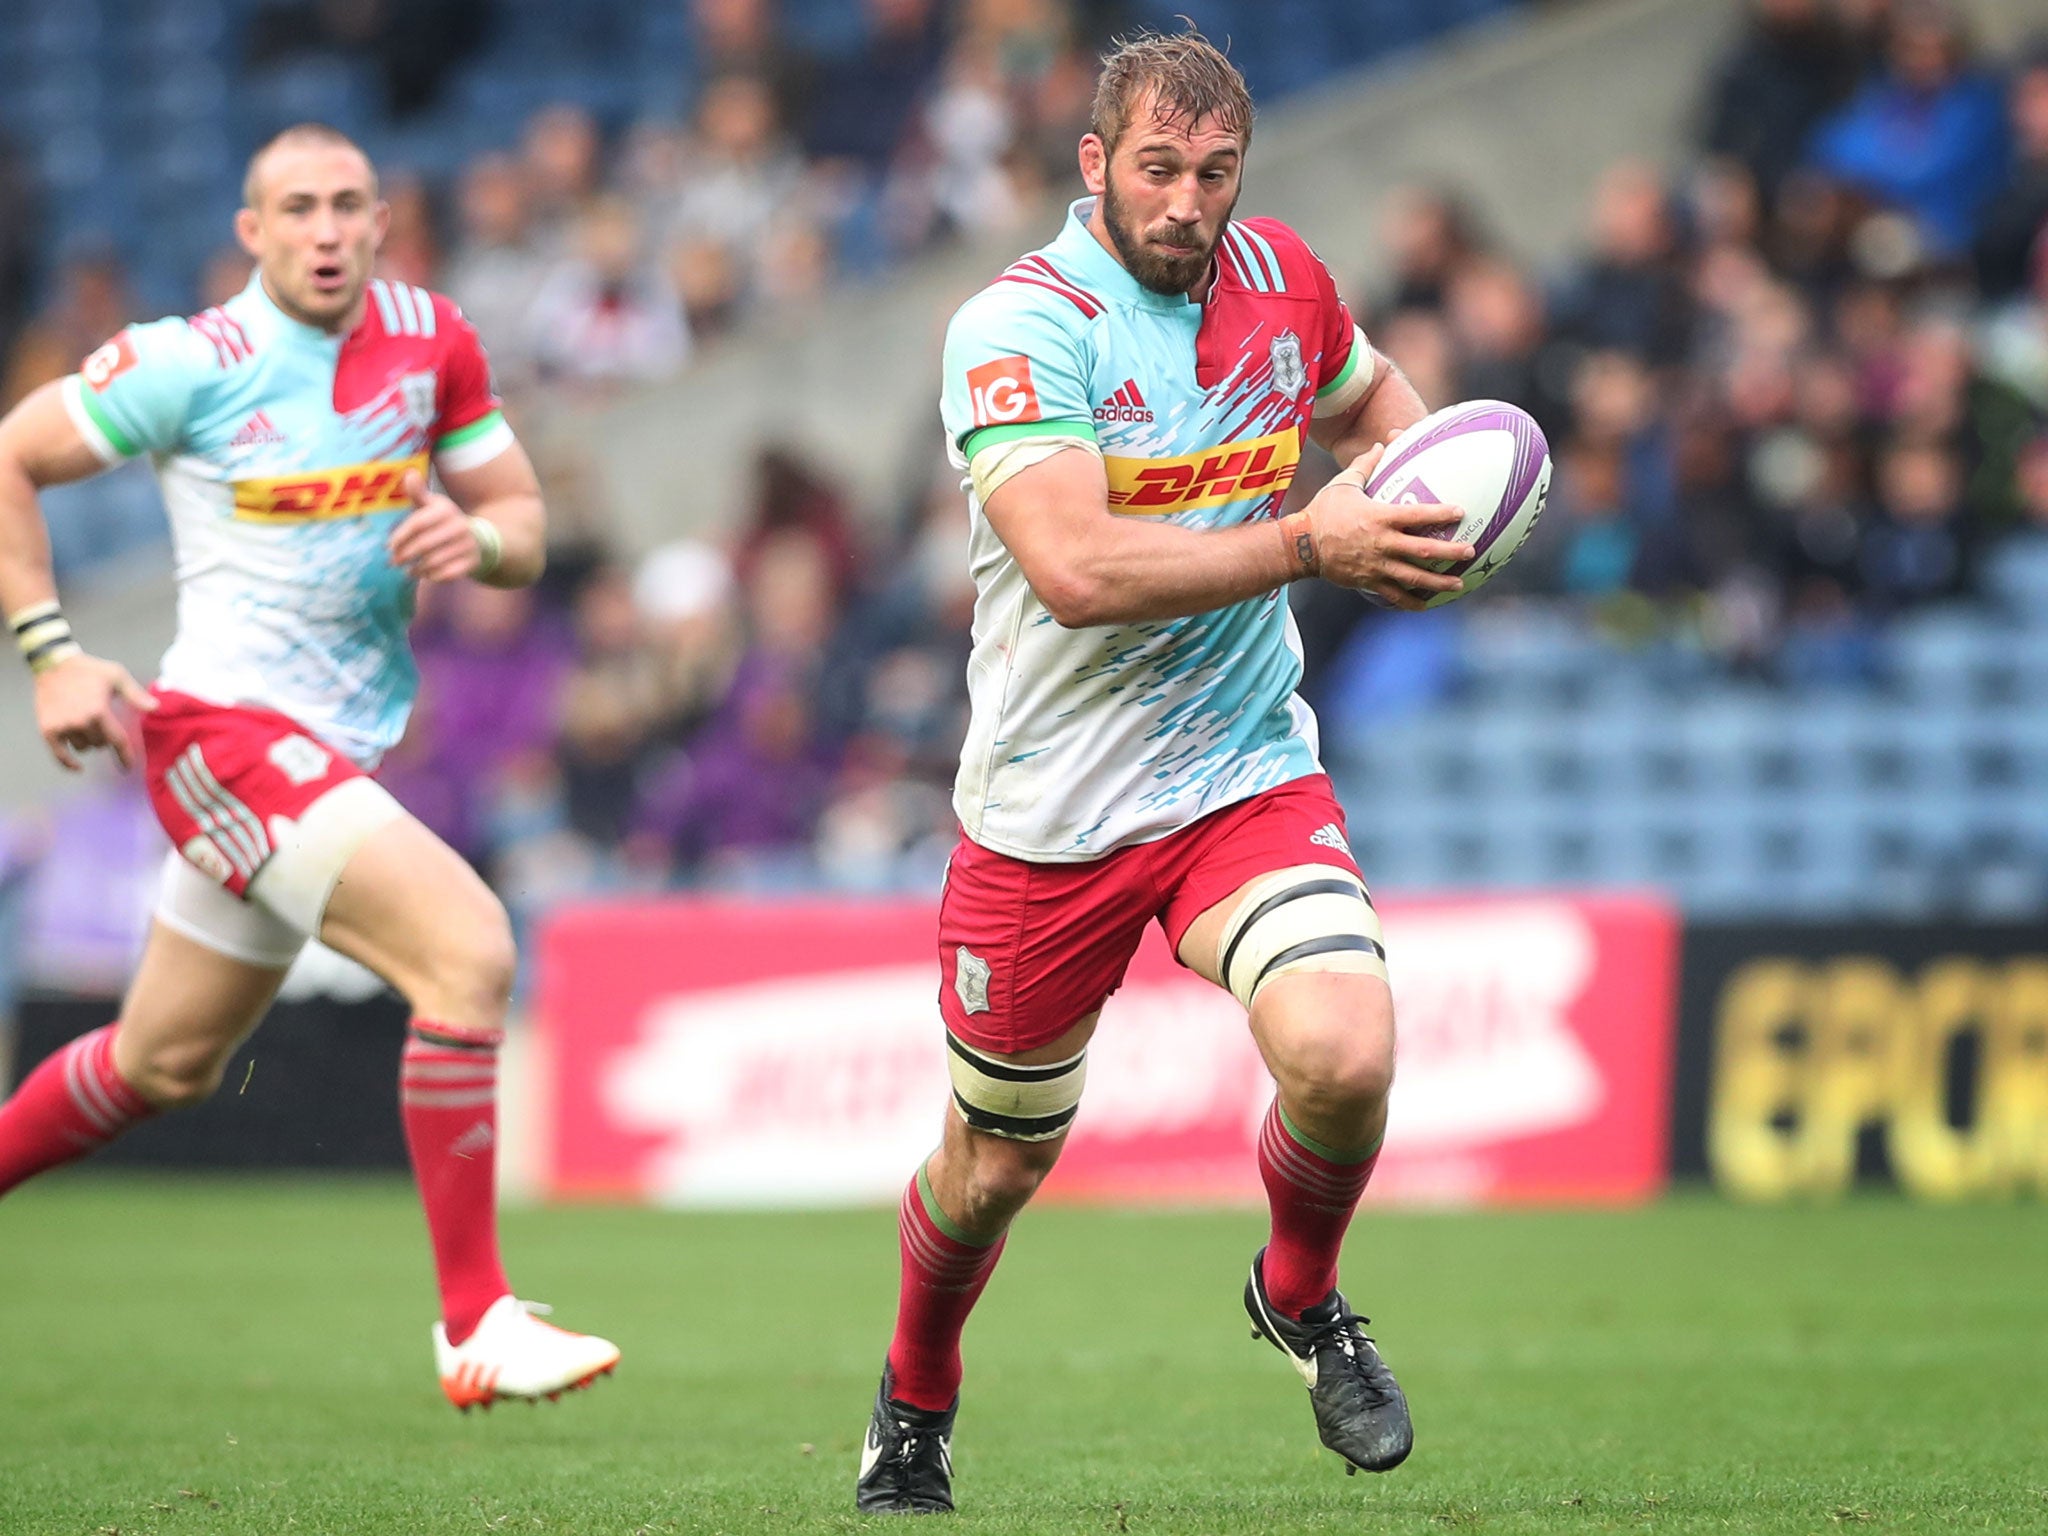 Chris Robshaw is set to return for Harlequins this weekend